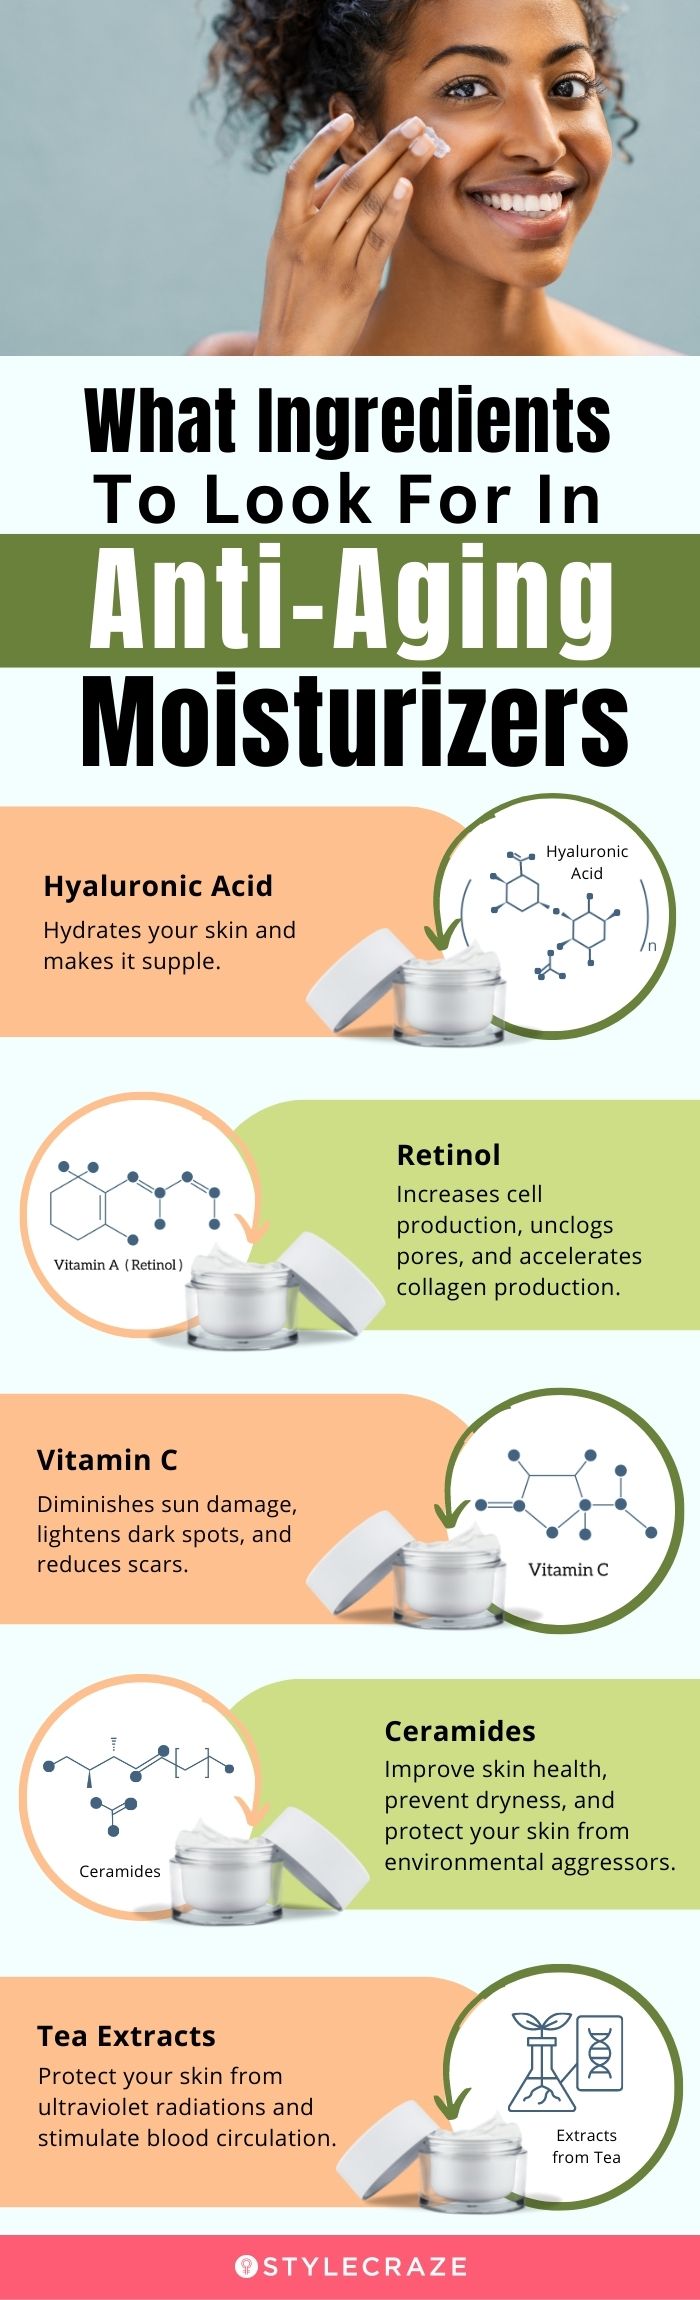 What Ingredients To Look For In Anti-Aging Moisturizers